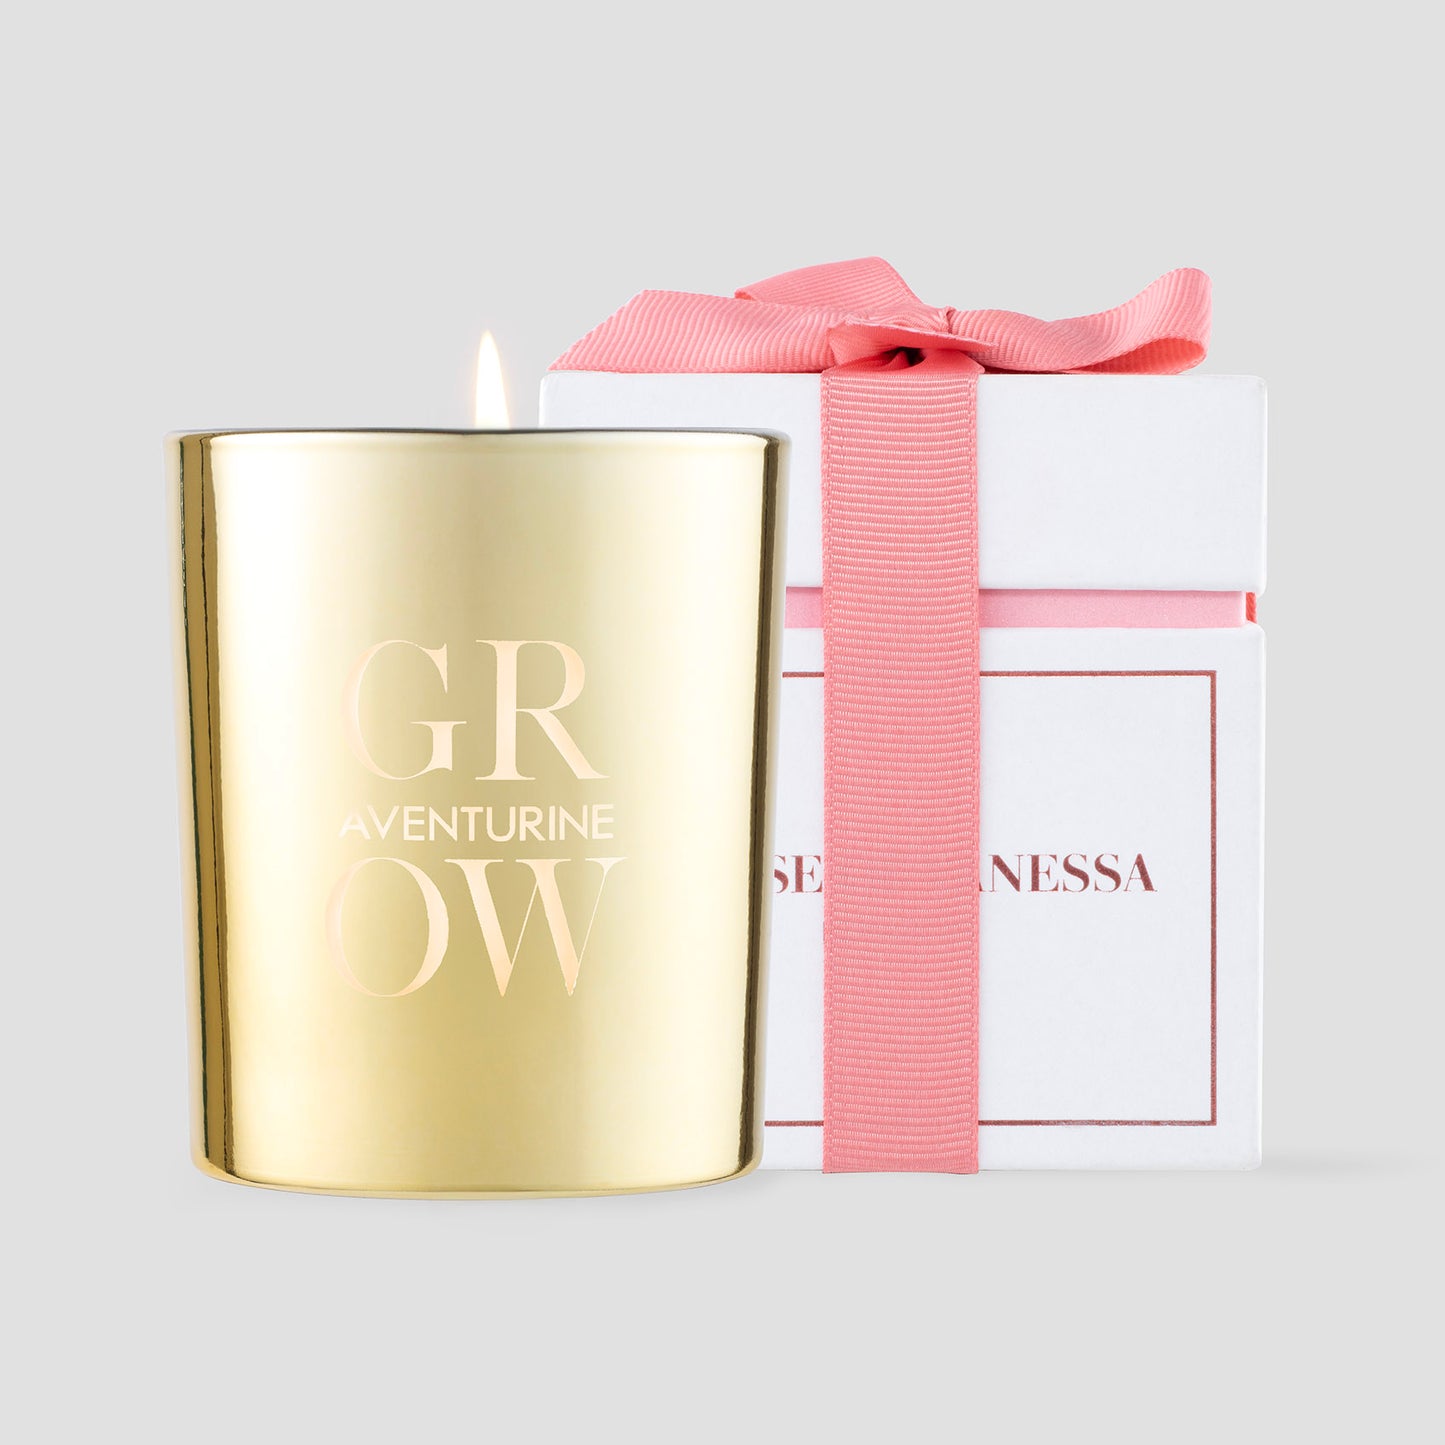 The GROW Candle